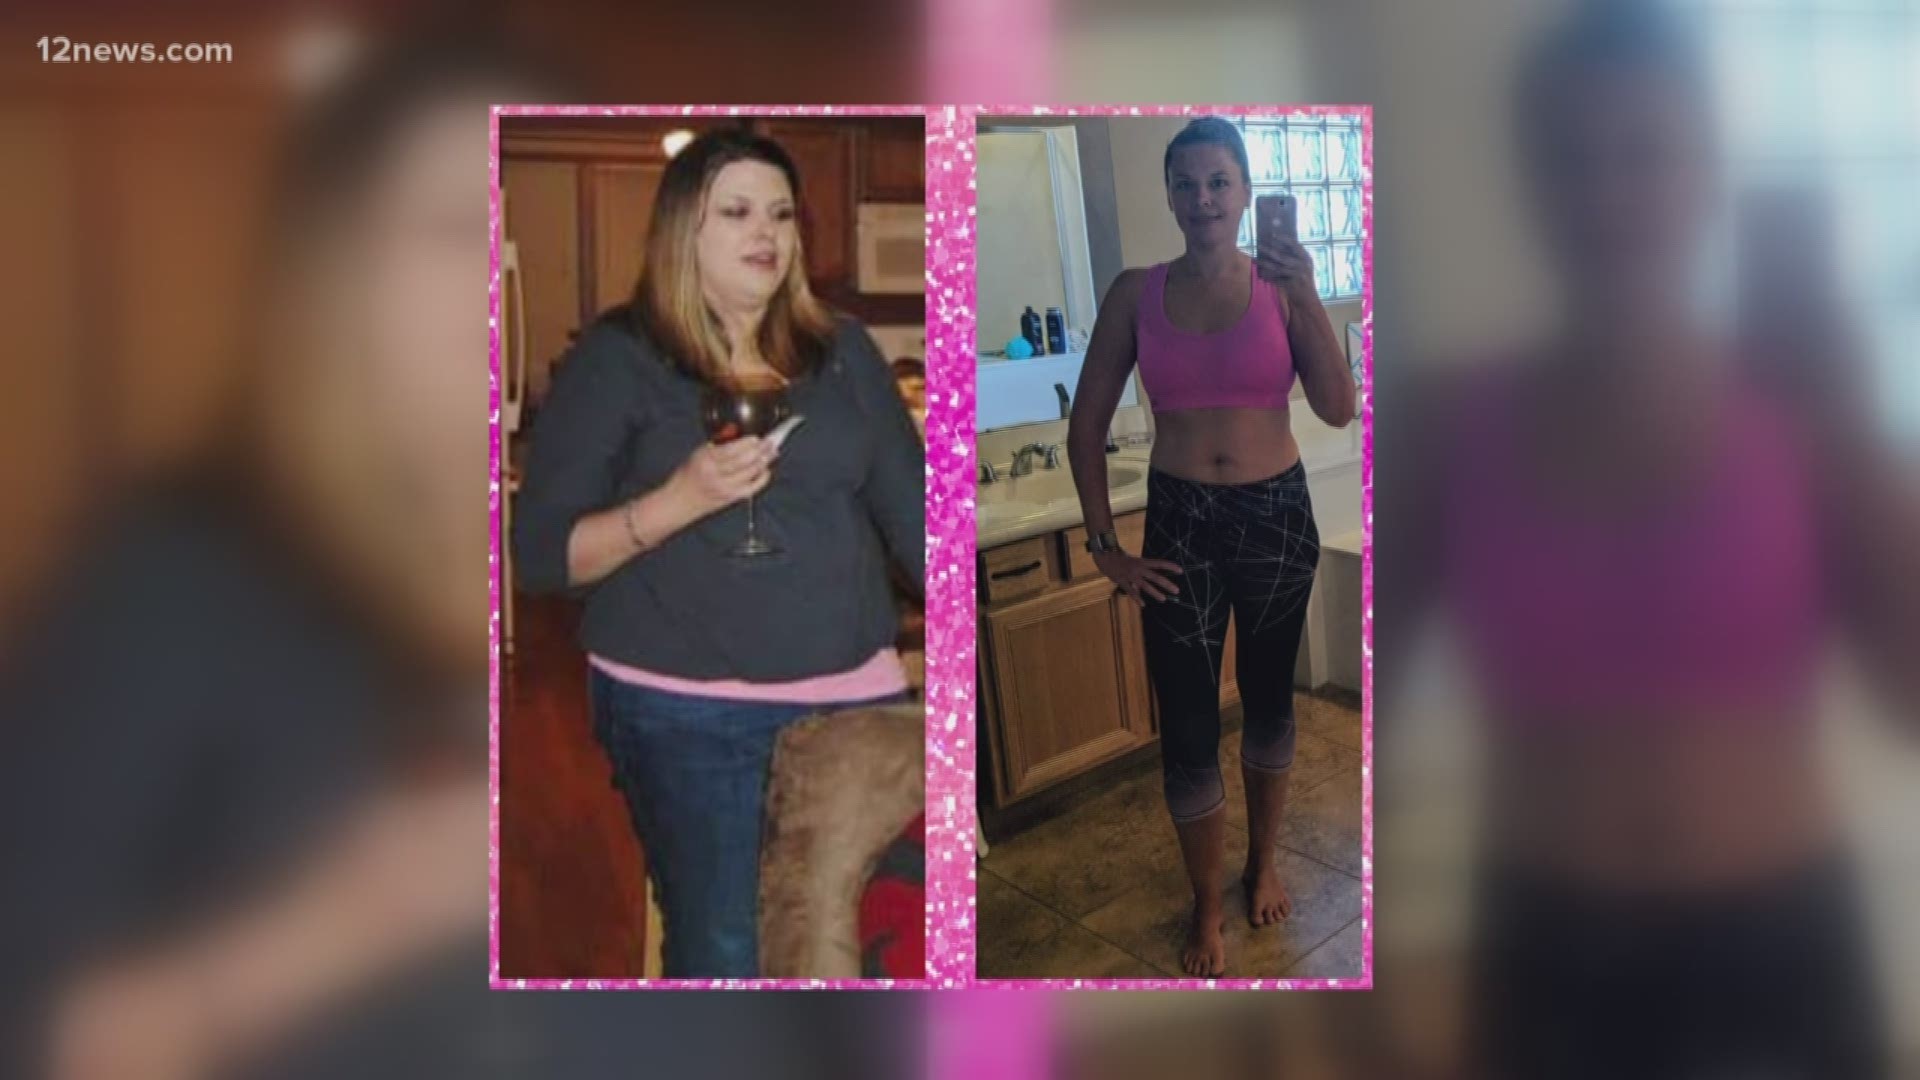 An Arizona mom dropped more than 100 pounds and is now in the pages of People Magazine after trying a new technique to purge the pounds